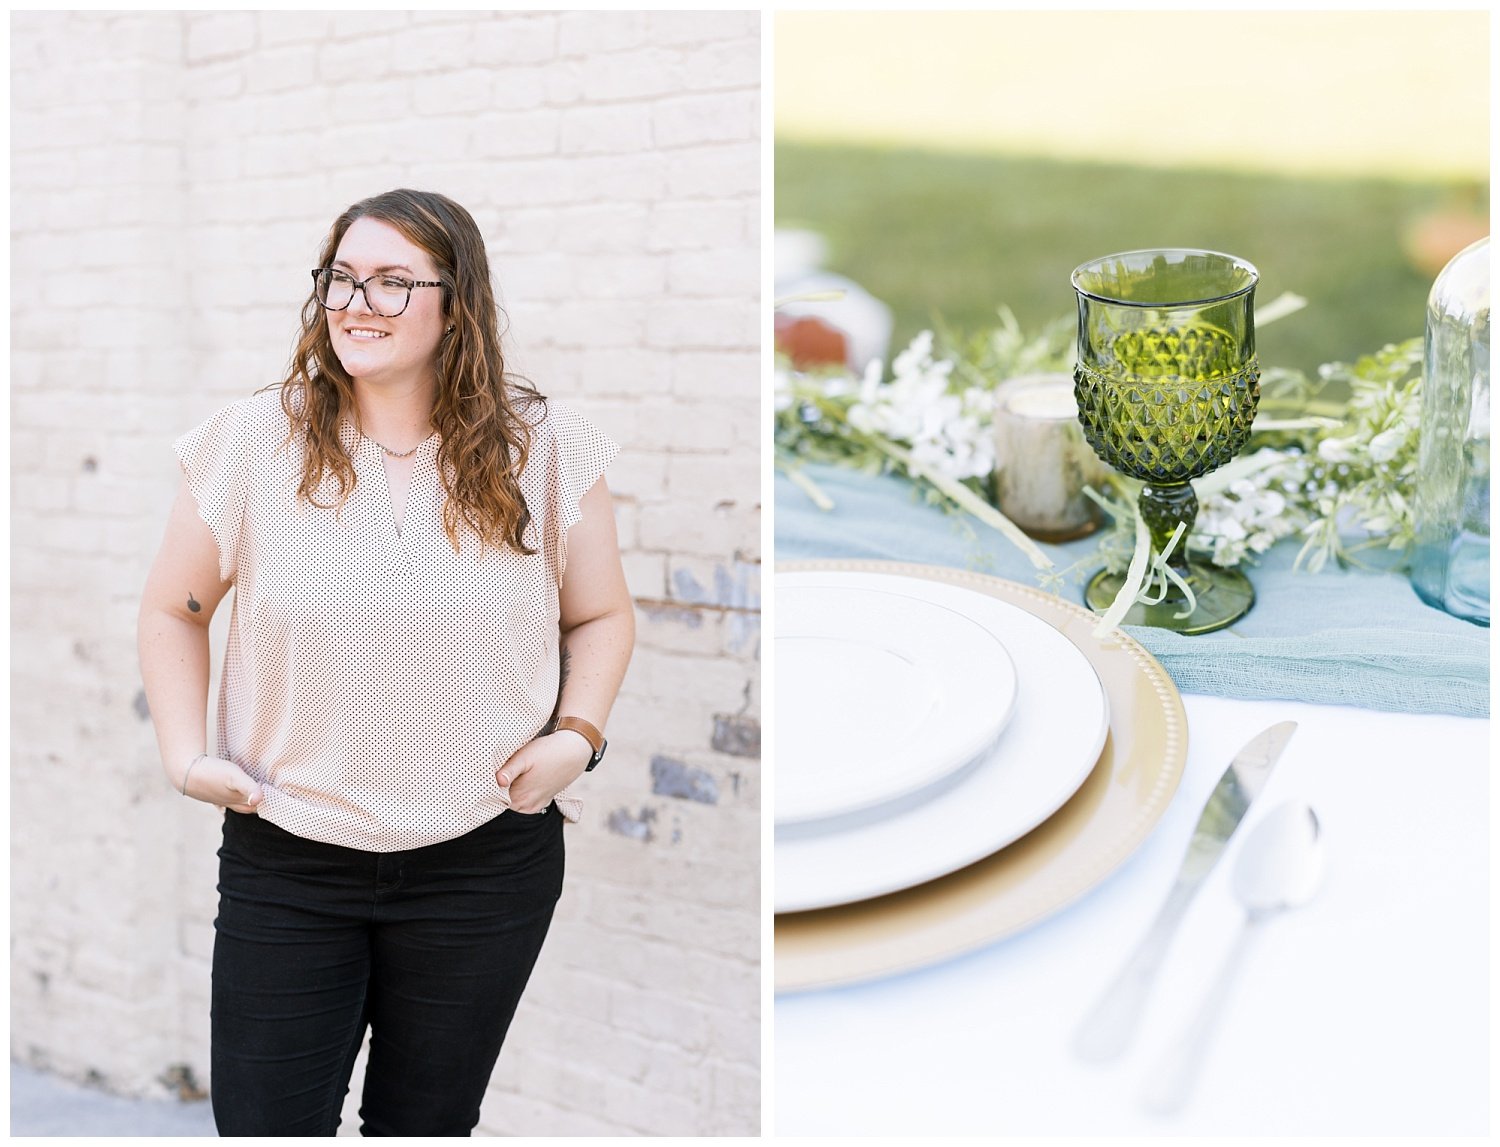 wedding planner setting up a table for flat lays